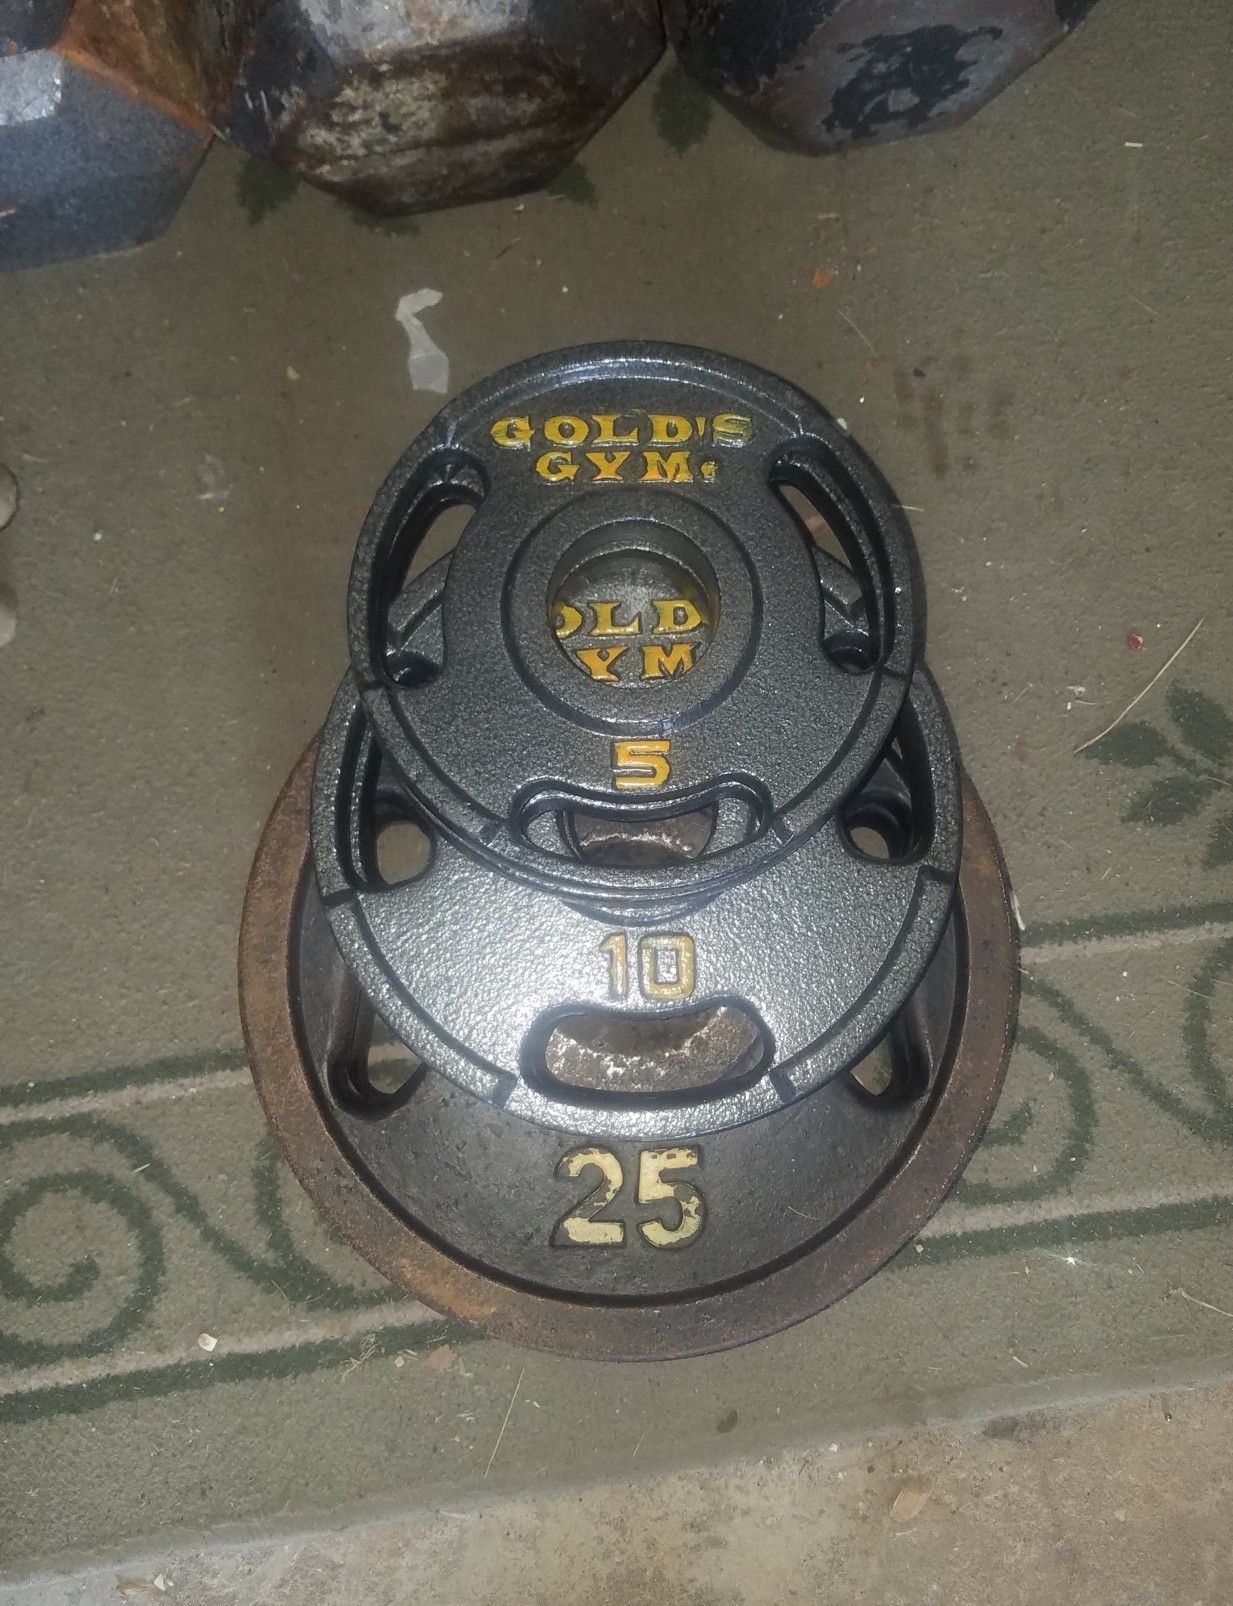 Gold's Gym Olympic barbell weights